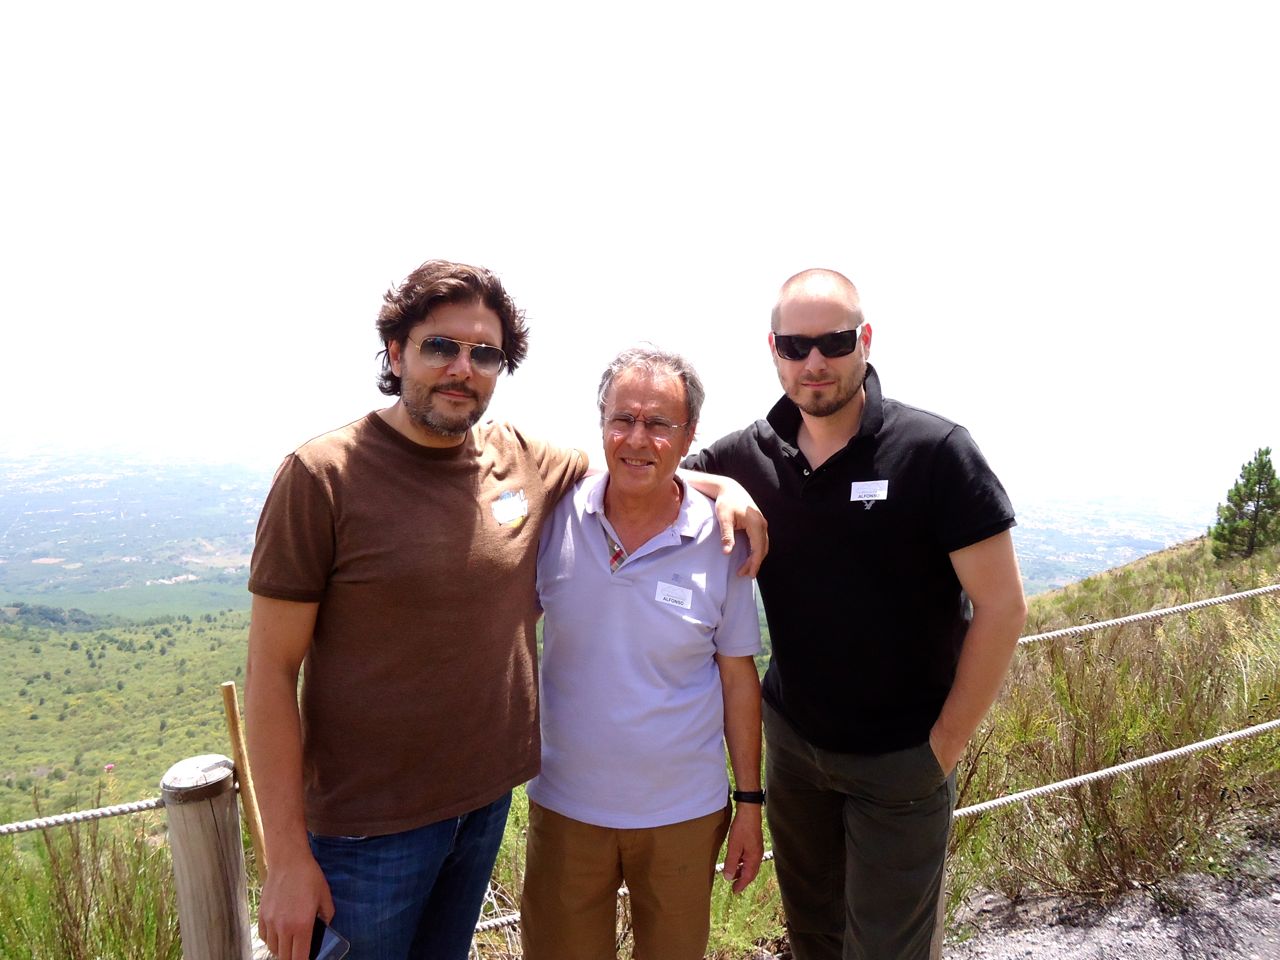 In this photo Massimo is on the left, in the middle his father Alberto and on the right the writer Stefan Kruecken